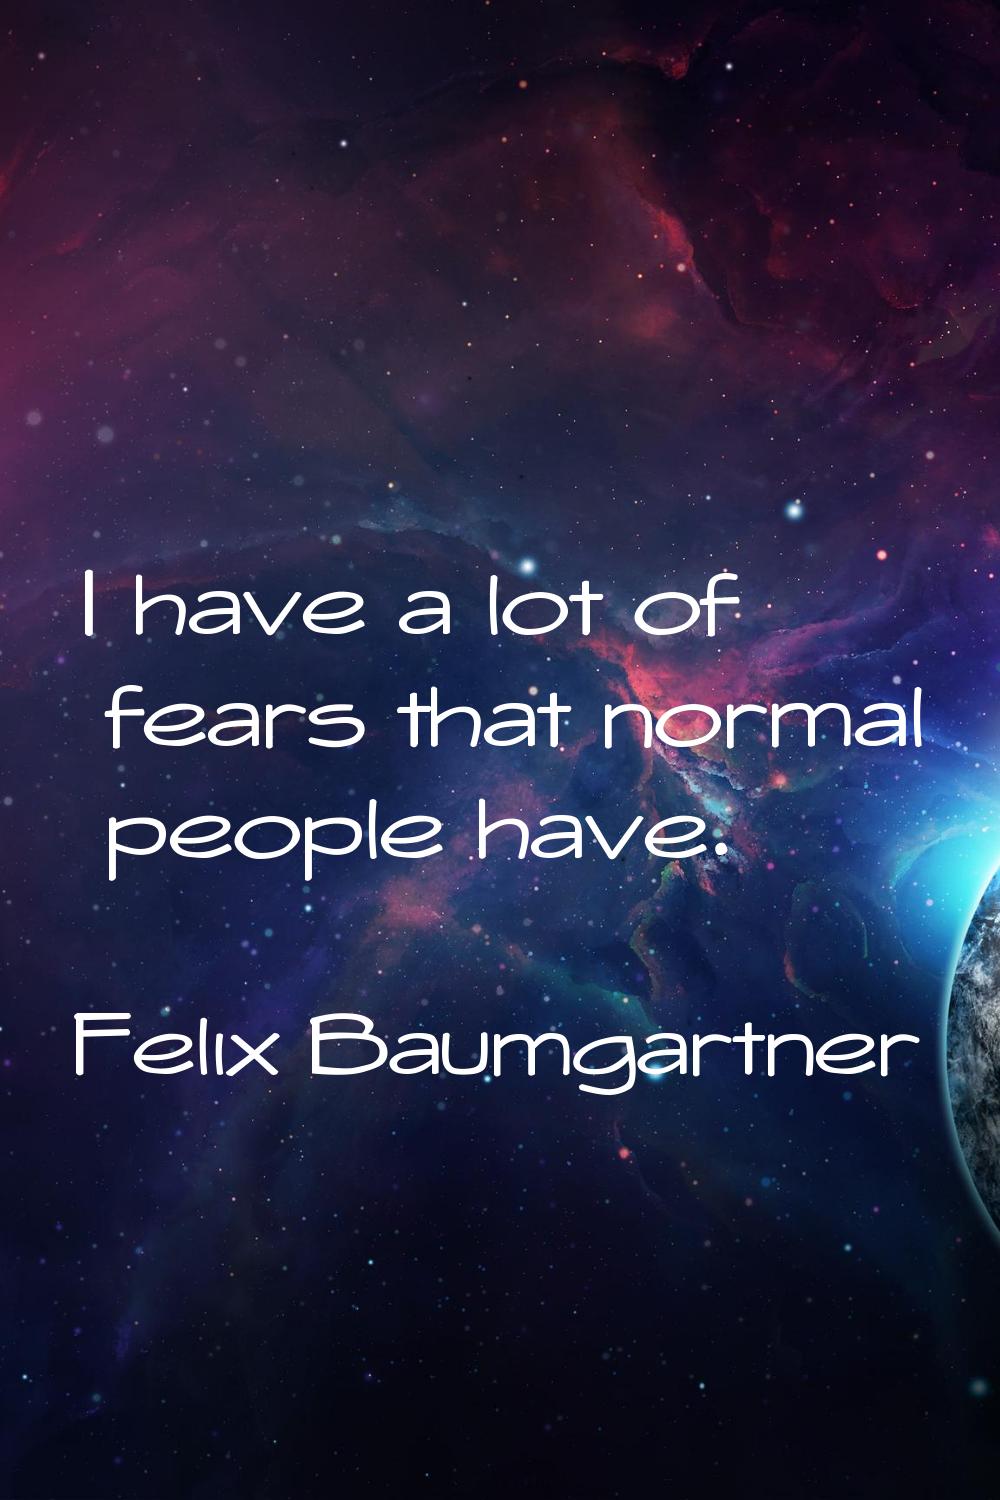 I have a lot of fears that normal people have.